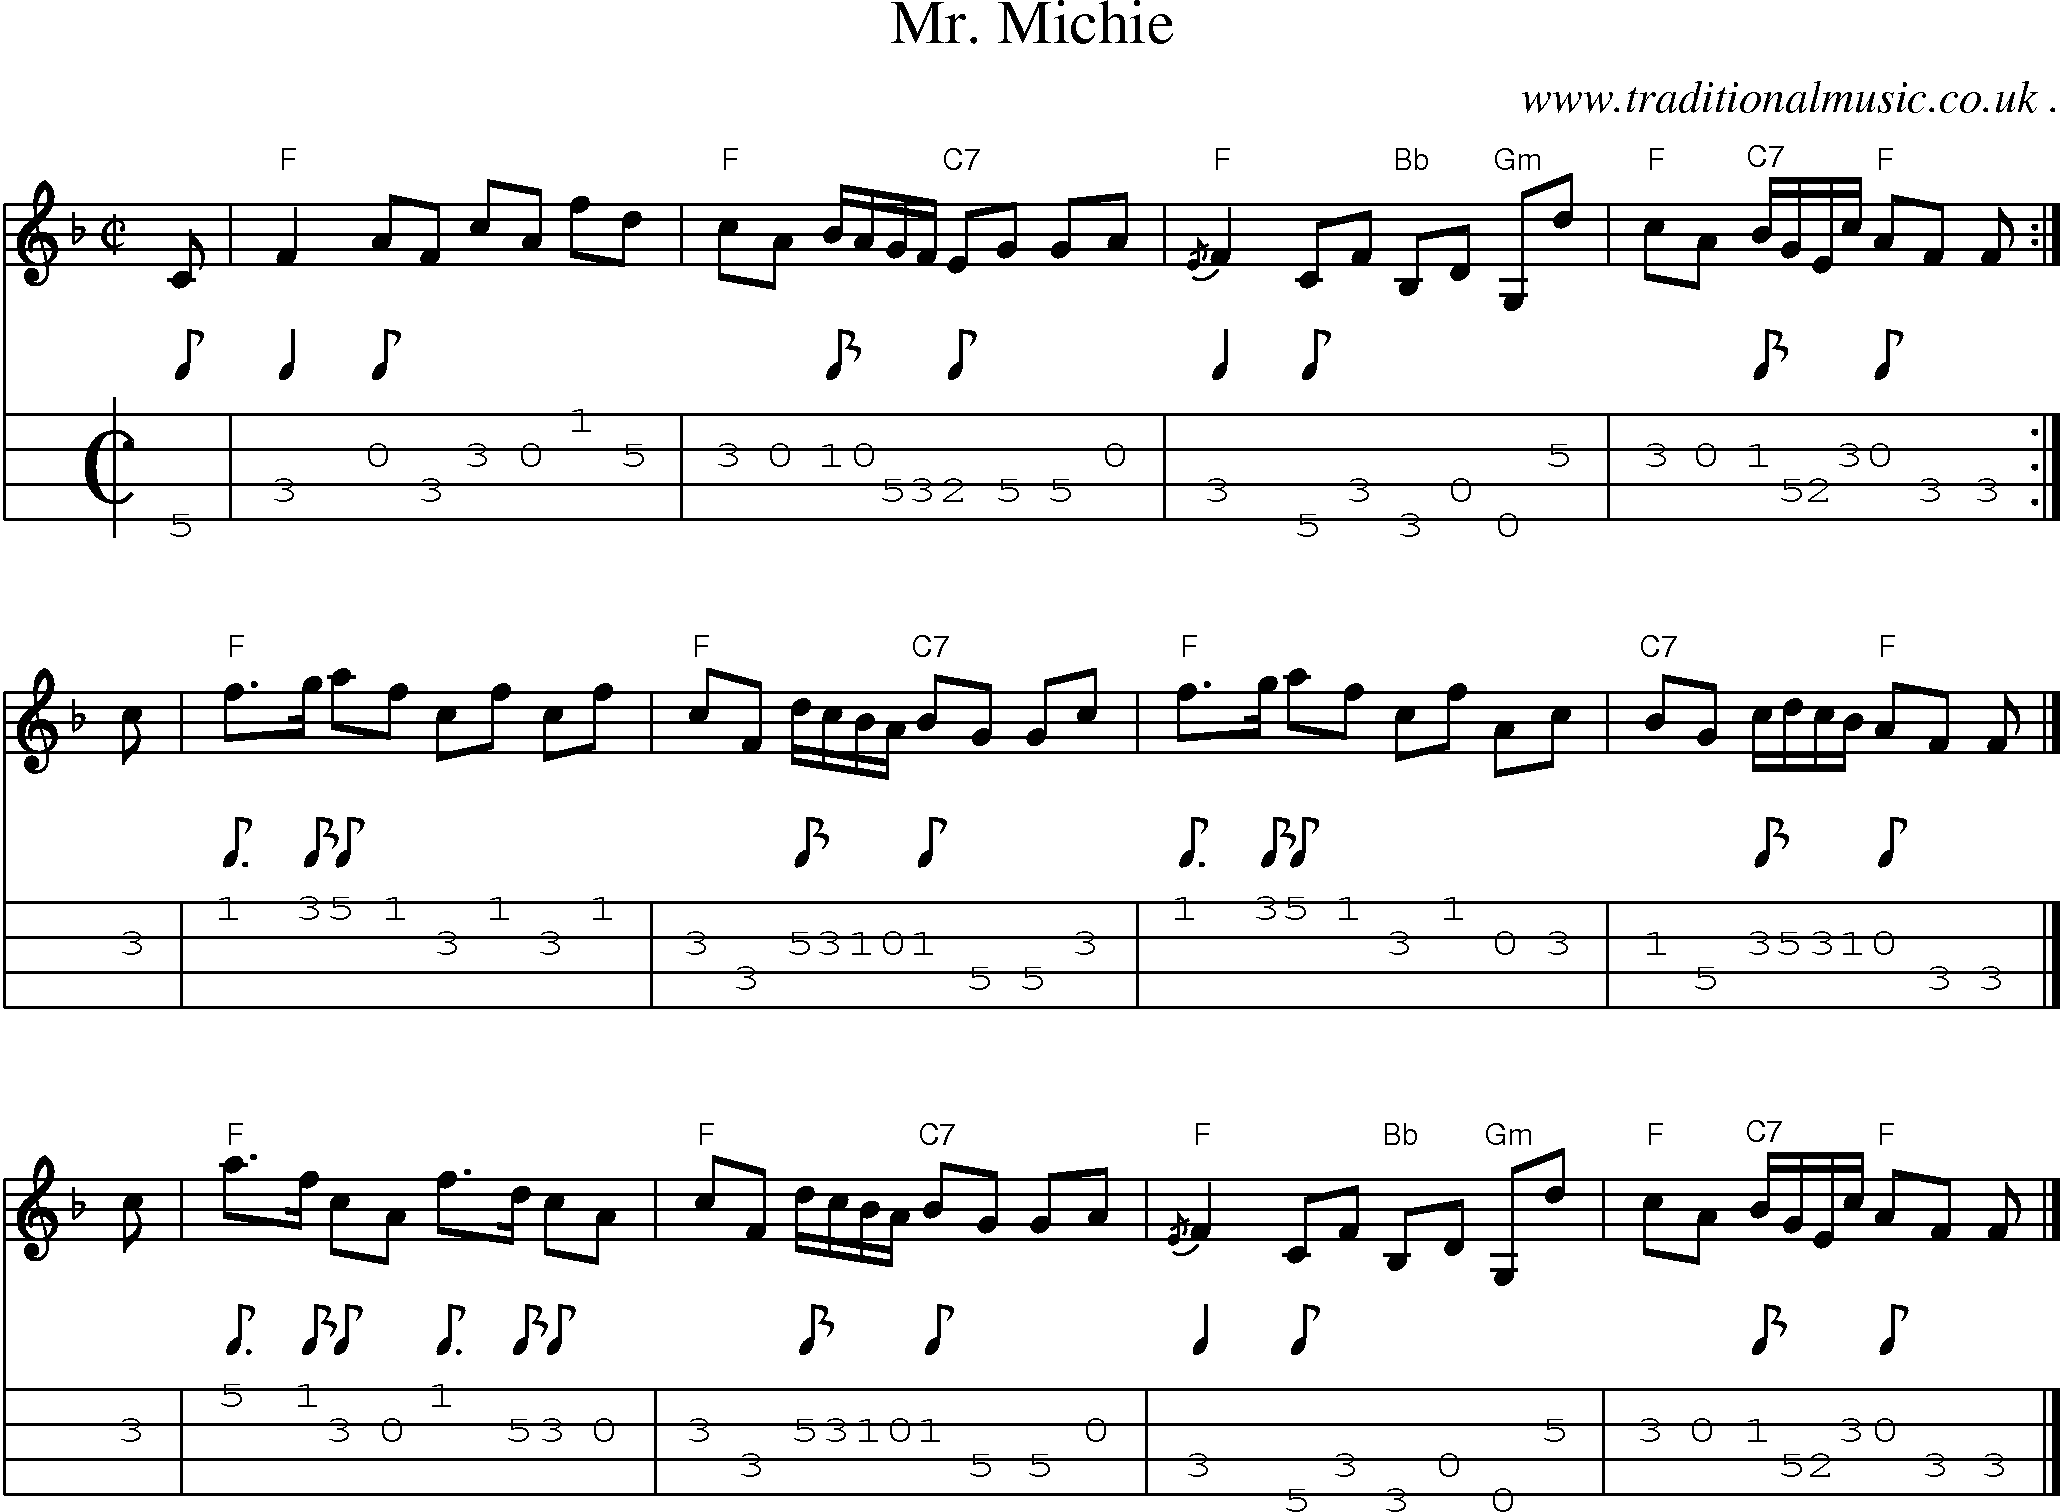 Sheet-music  score, Chords and Mandolin Tabs for Mr Michie